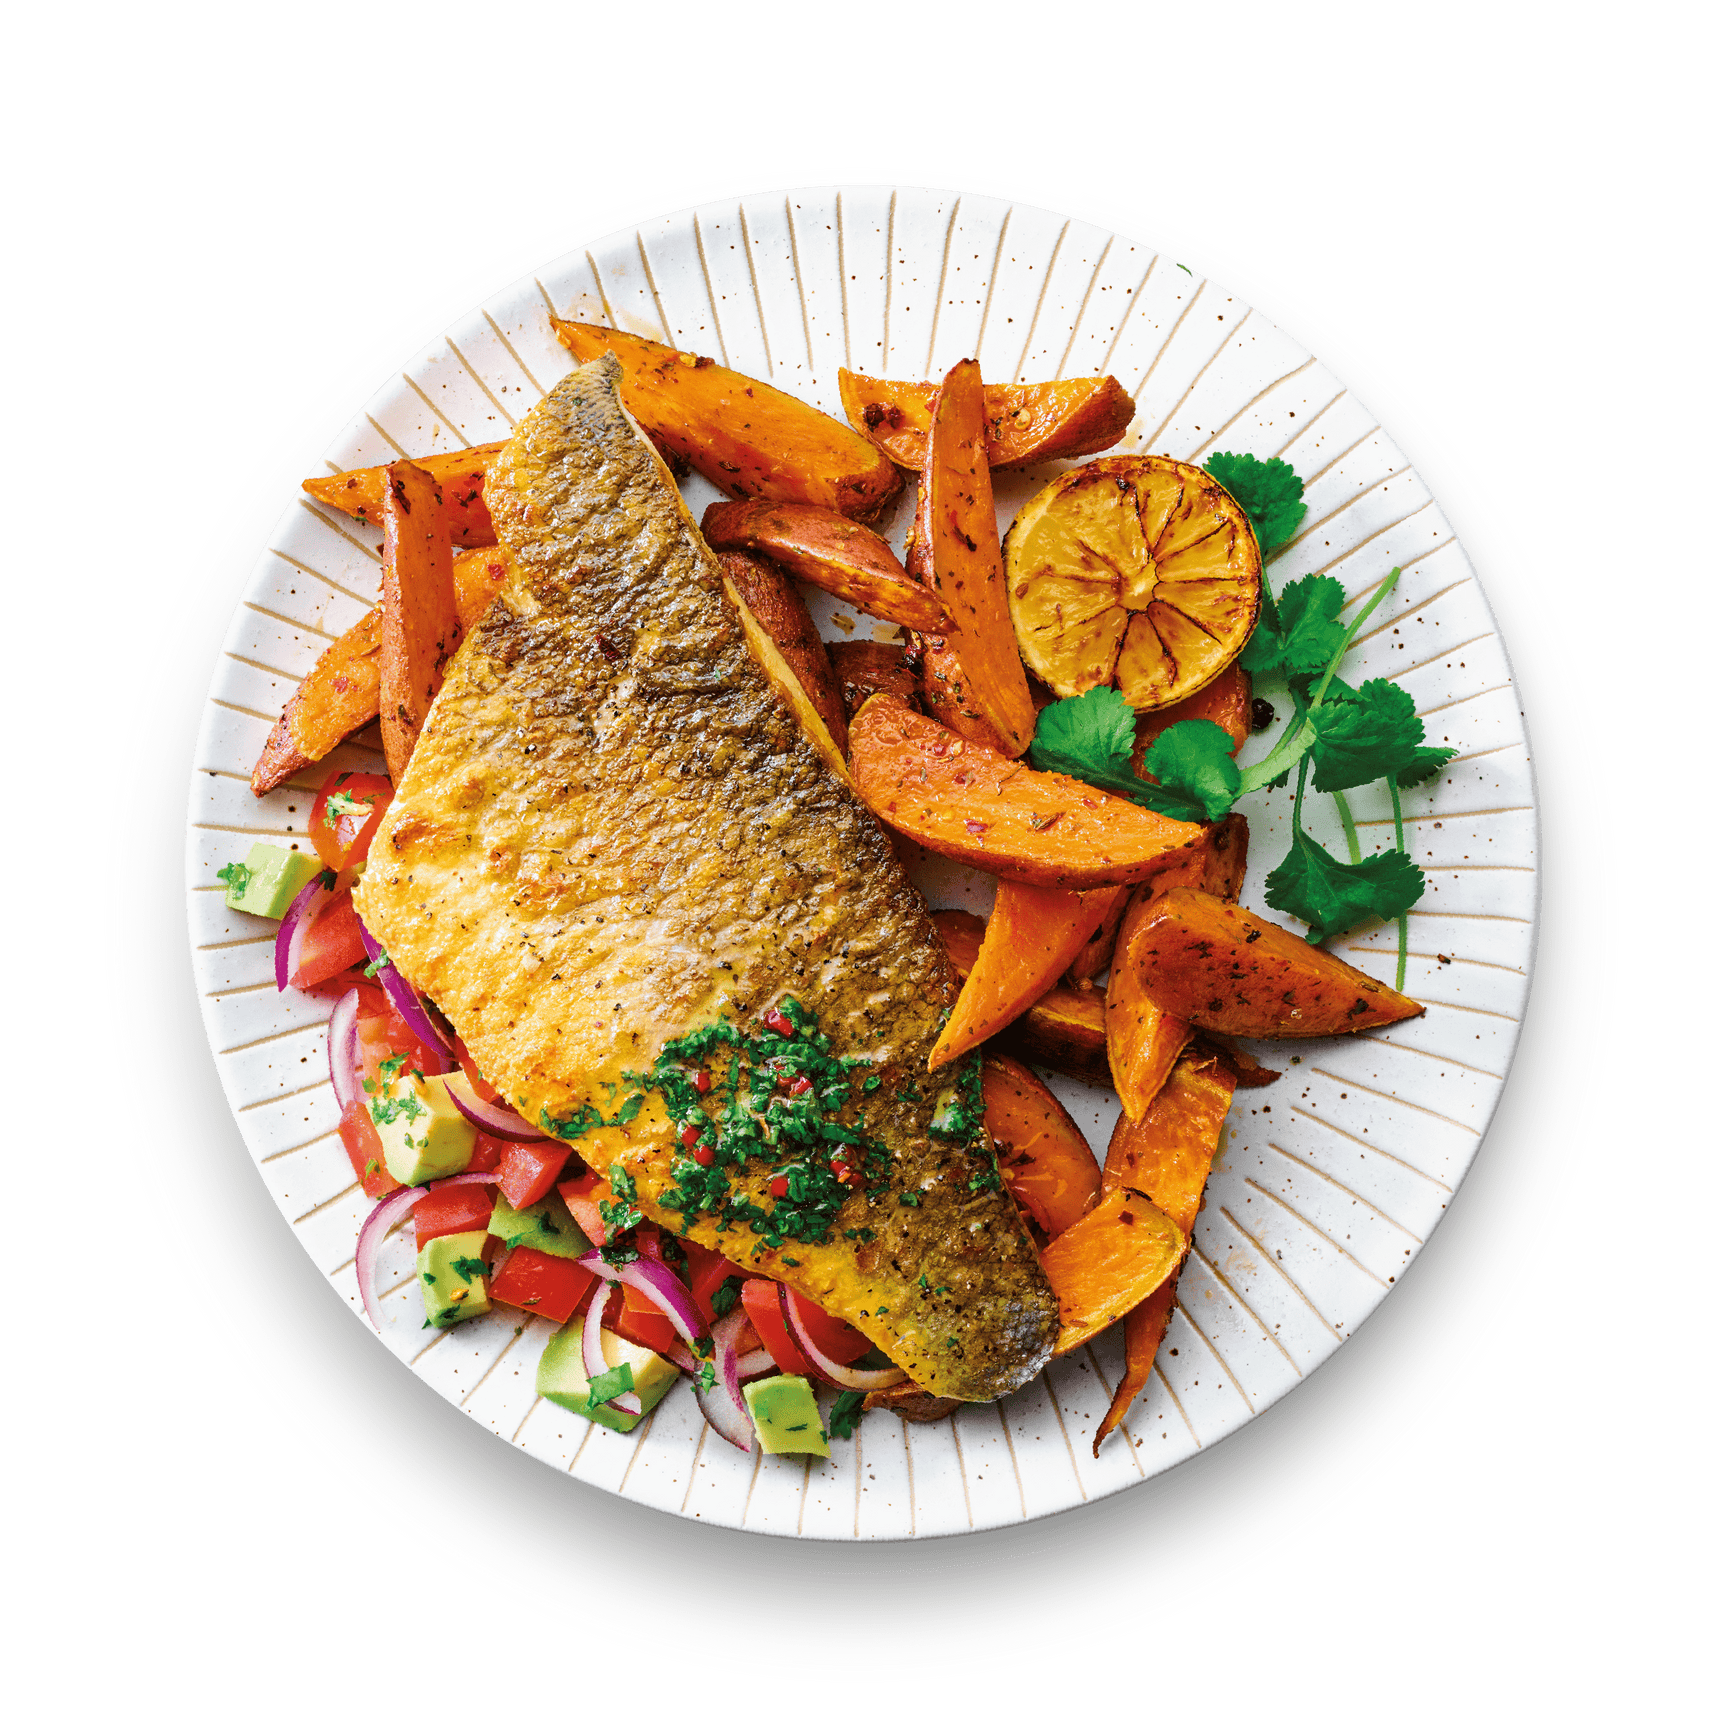 Fred's sea bass fillets with sweet potato wedges, chimichurri and avocado salsa